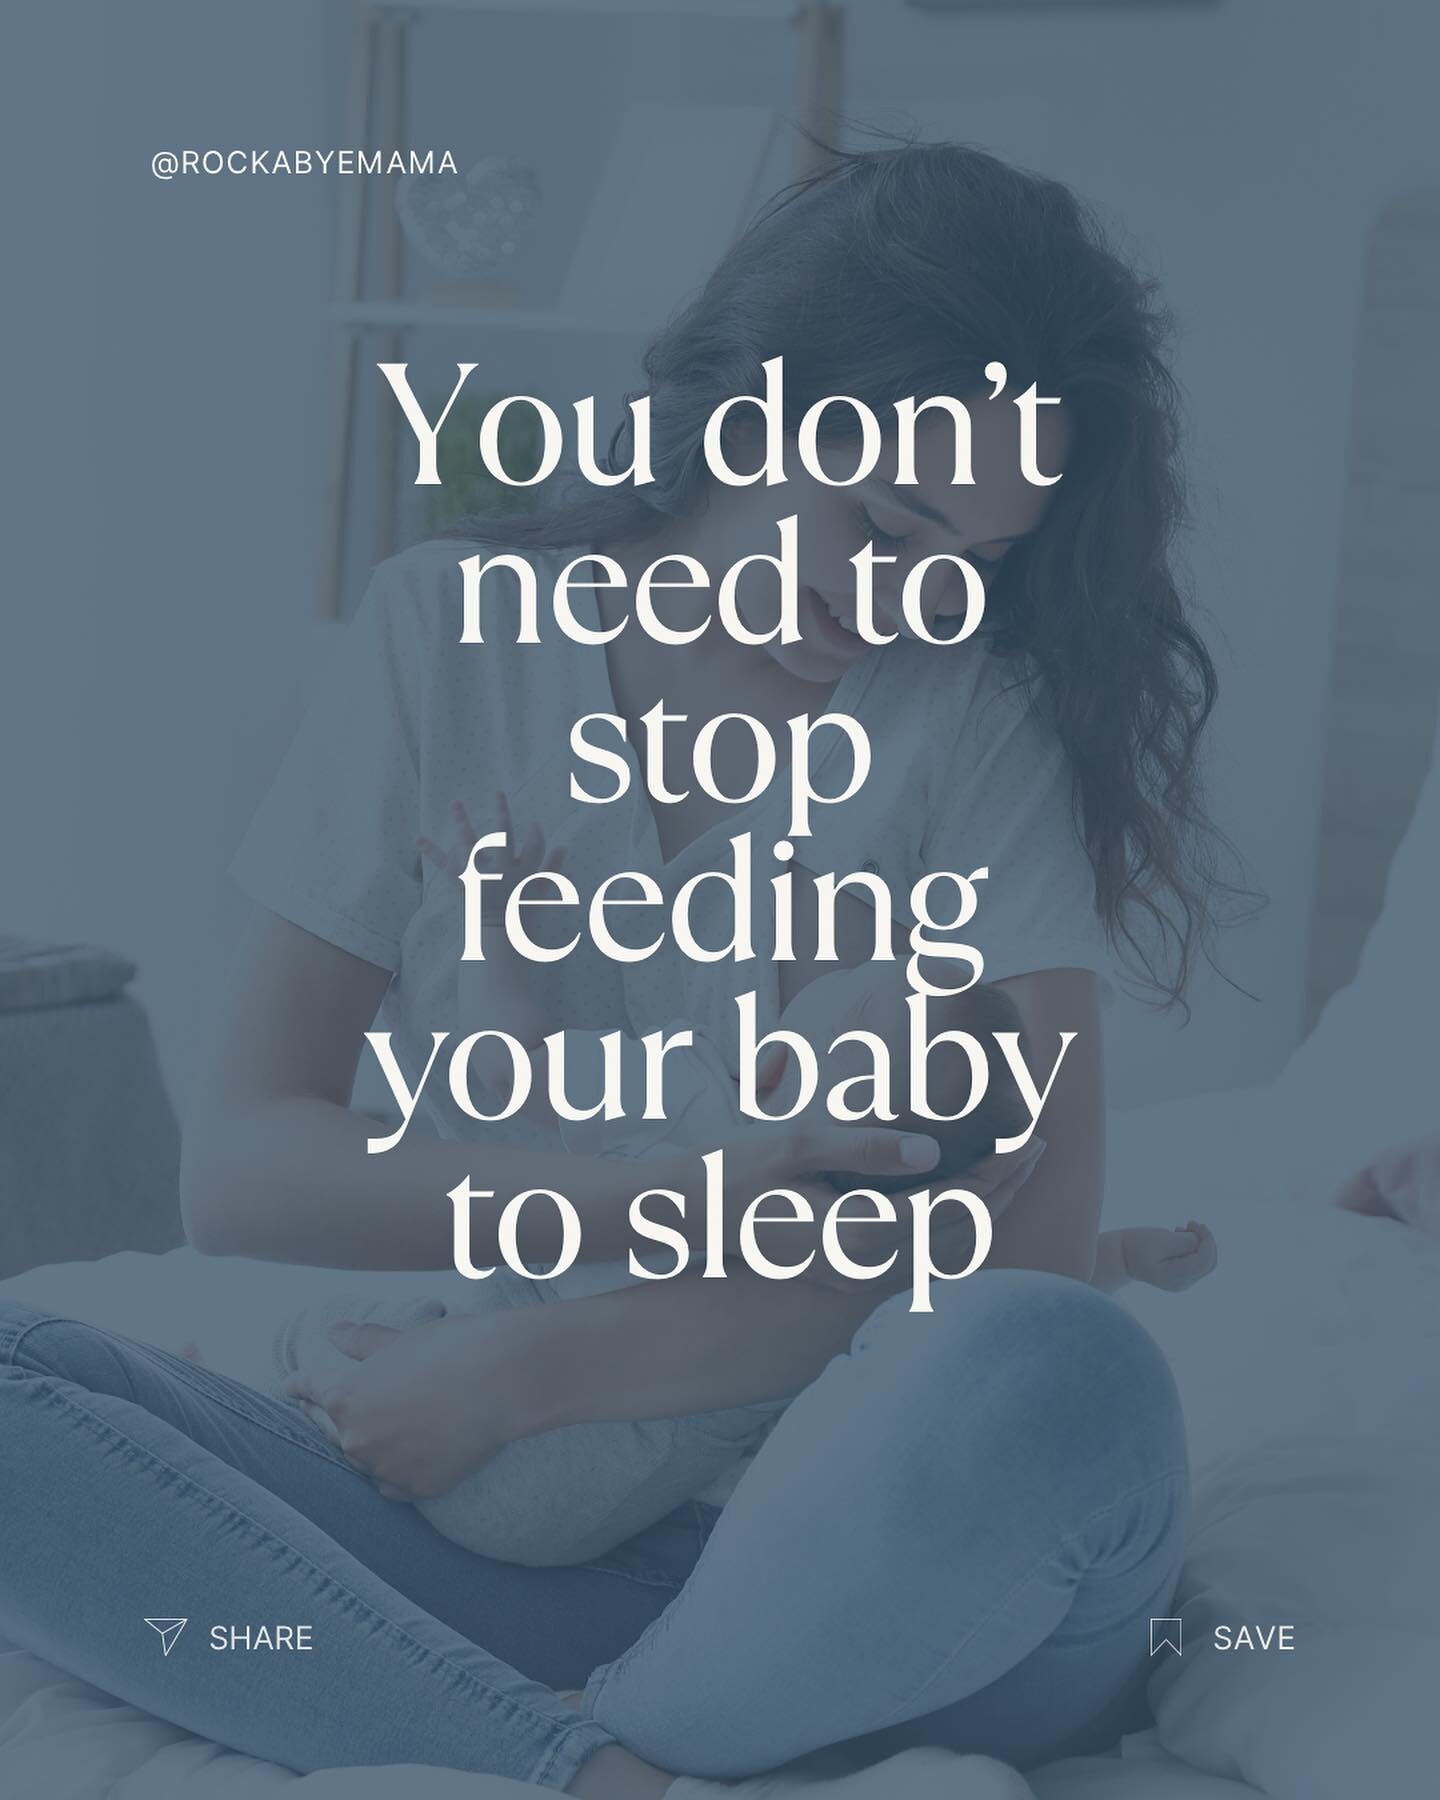 The truth is, there&rsquo;s no one-size-fits-all approach to parenting, especially when it comes to sleep routines. 

While some experts caution against feeding babies to sleep, this advice overlooks the natural comfort and bonding that breastfeeding